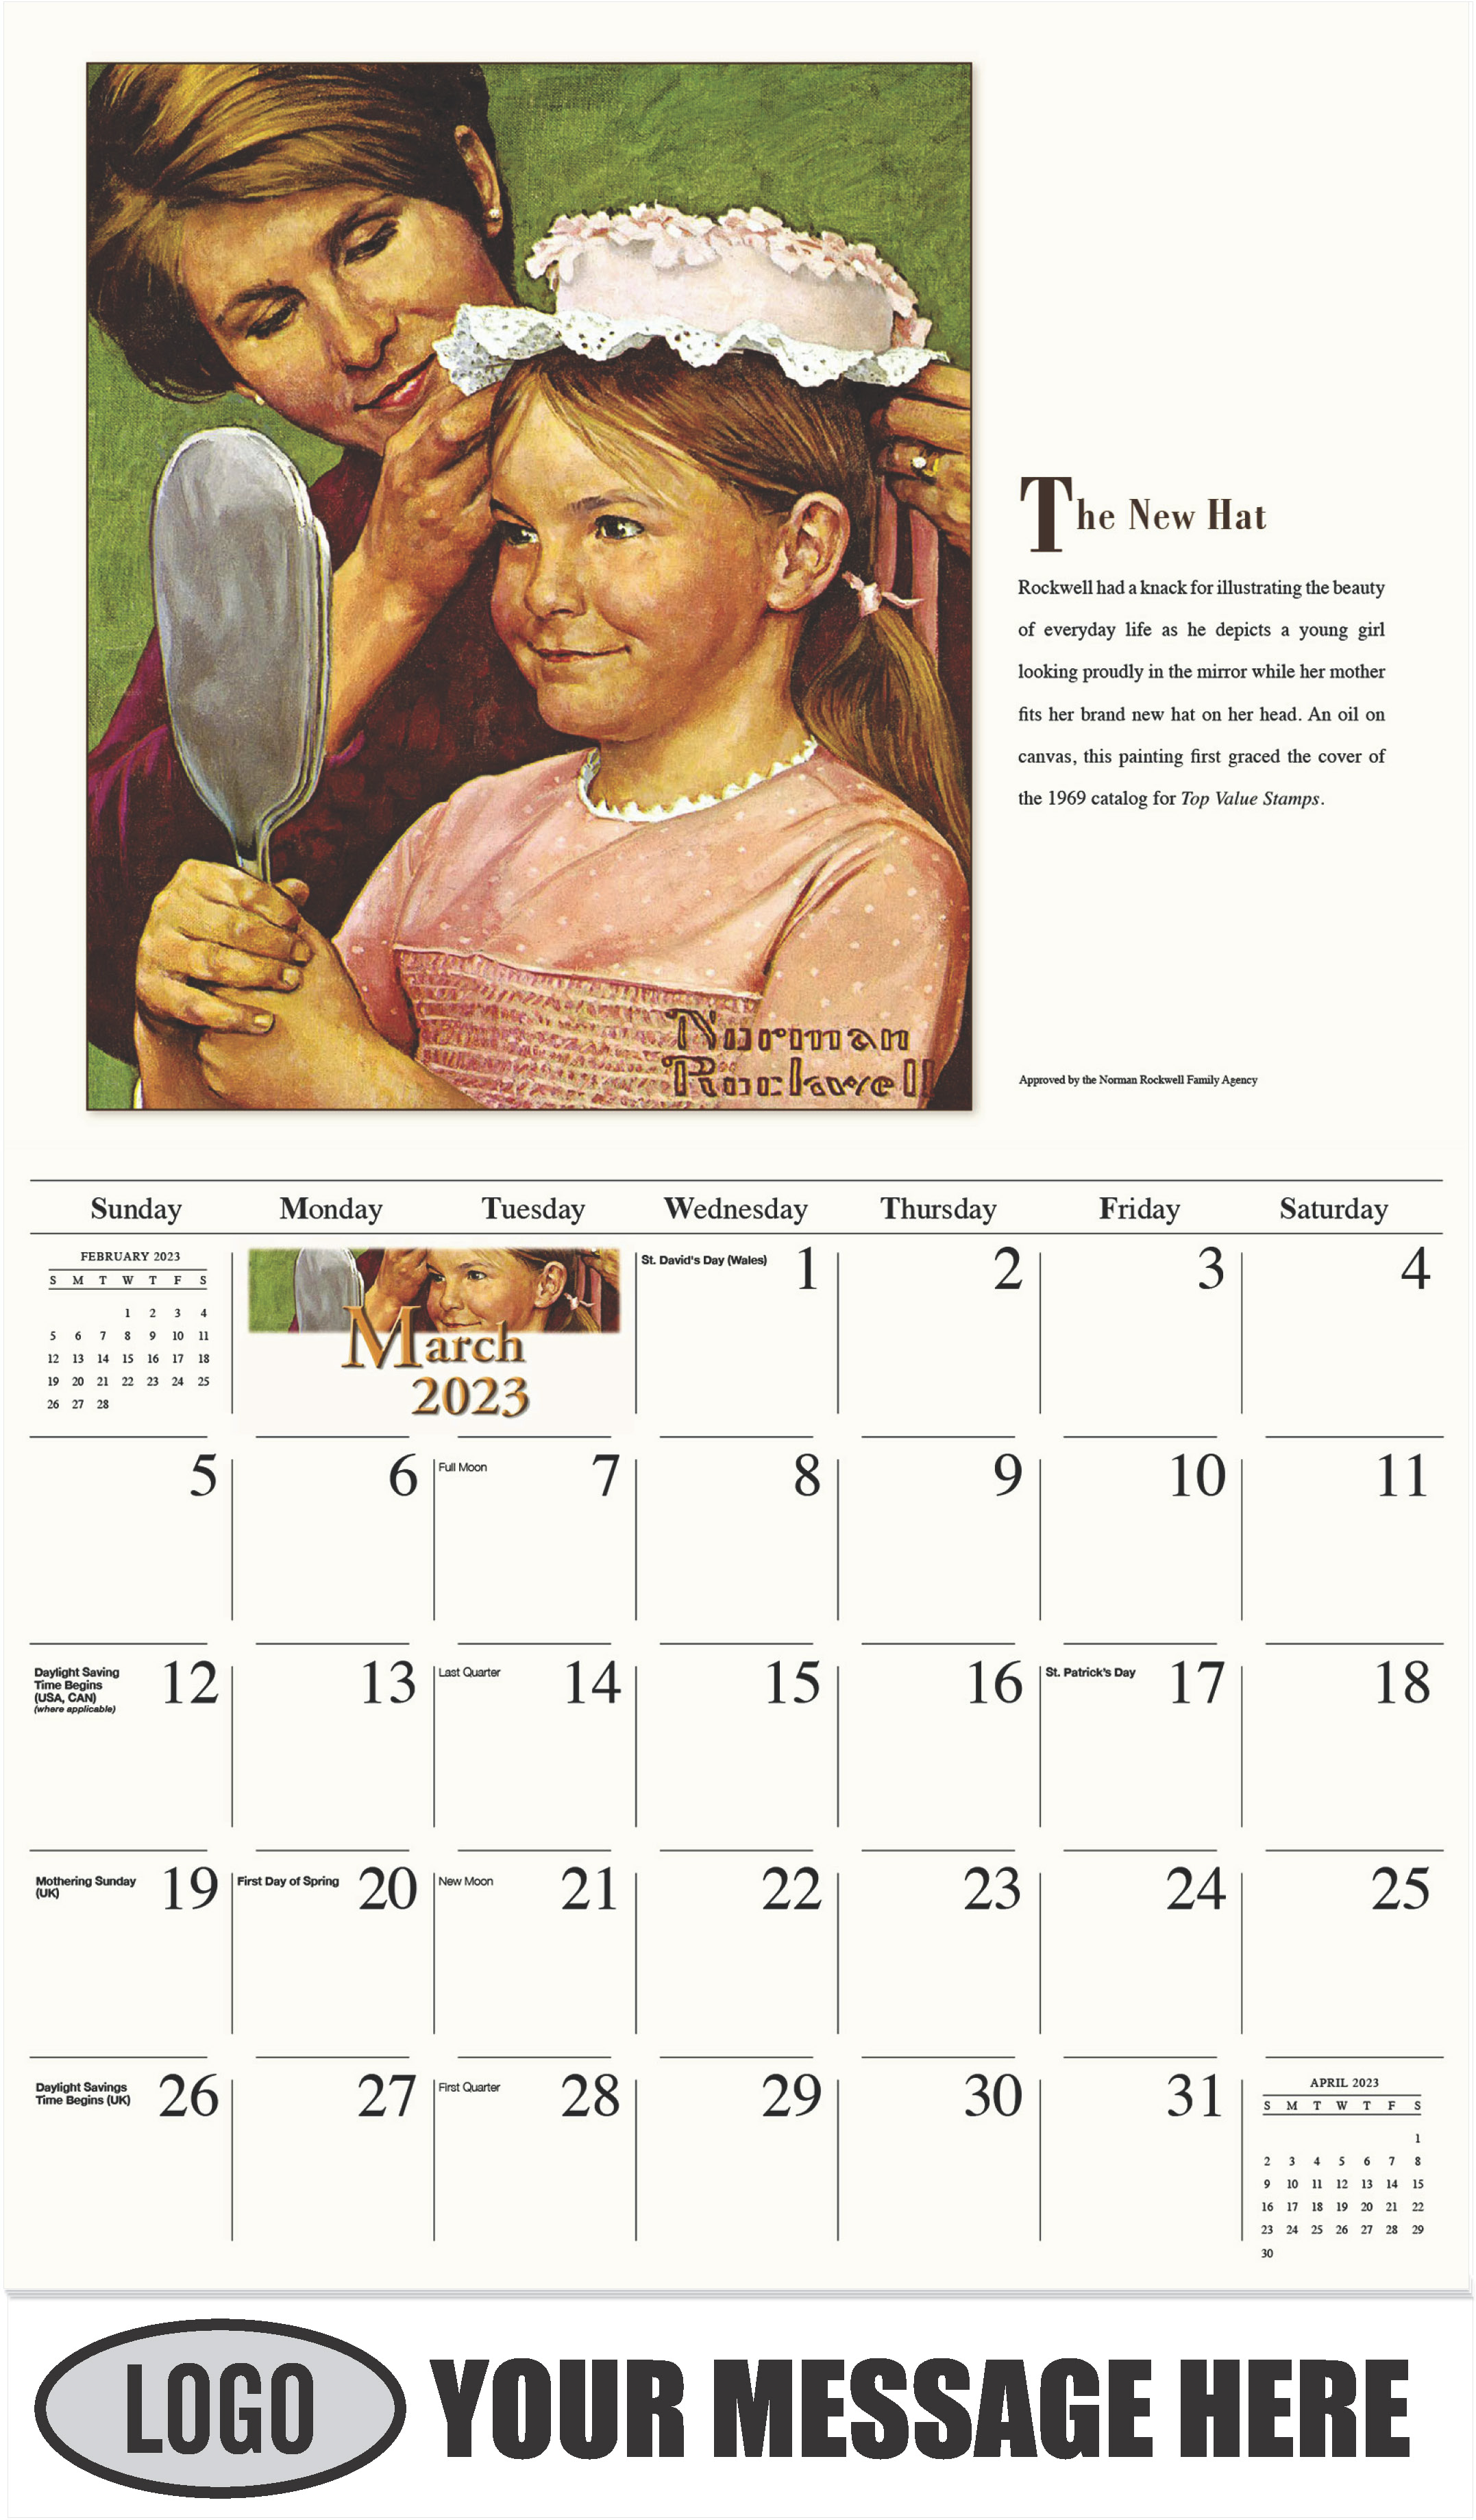 The New Hat - March - Norman Rockwell - Memorable Images 2023 Promotional Calendar